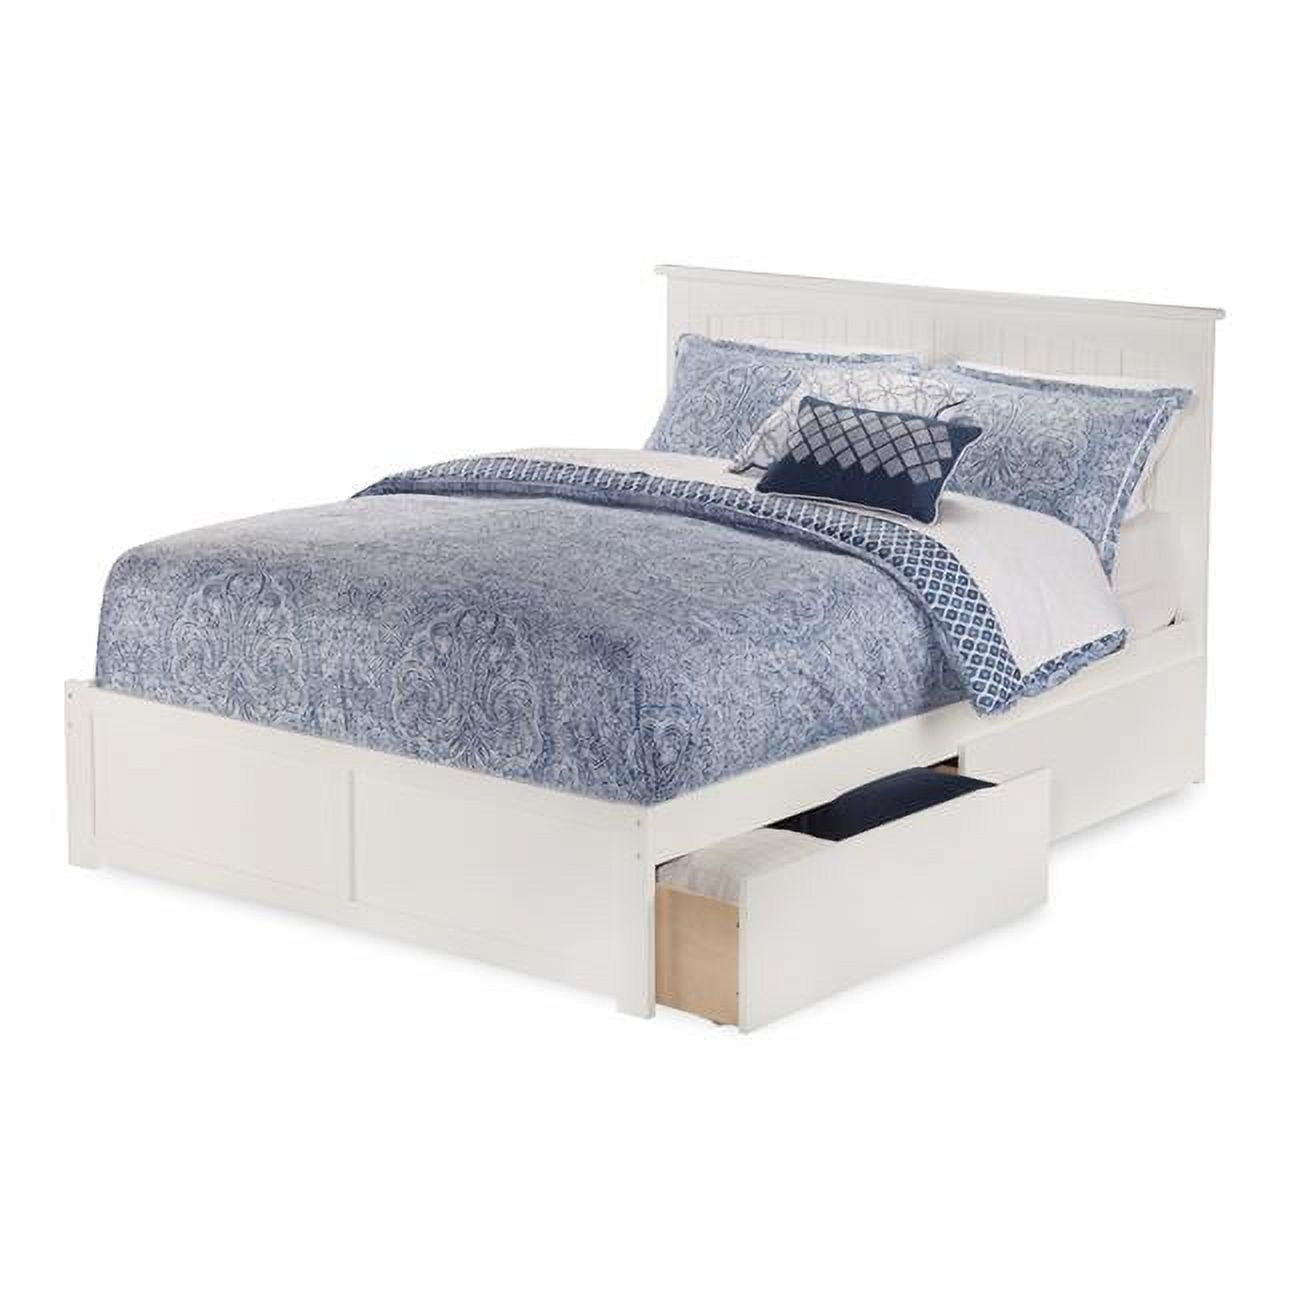 Picture of Atlantic Furniture AR8236112 Nantucket Match Footboard with Urban Bed Drawers x 1 - White, Full Size